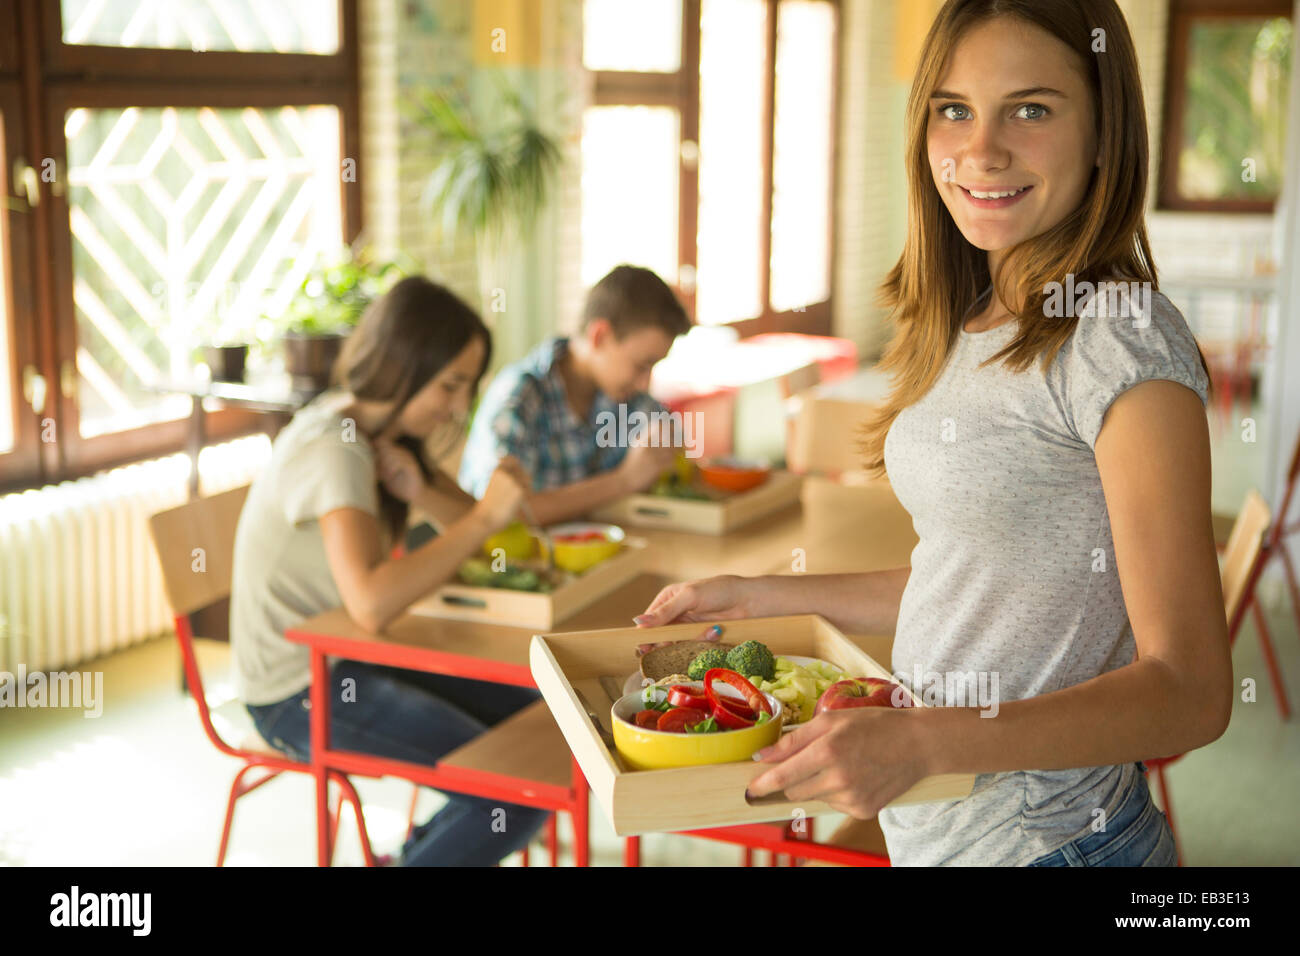 Three colorful lunch trays on table Stock Photo by ©oocoskun 102361070